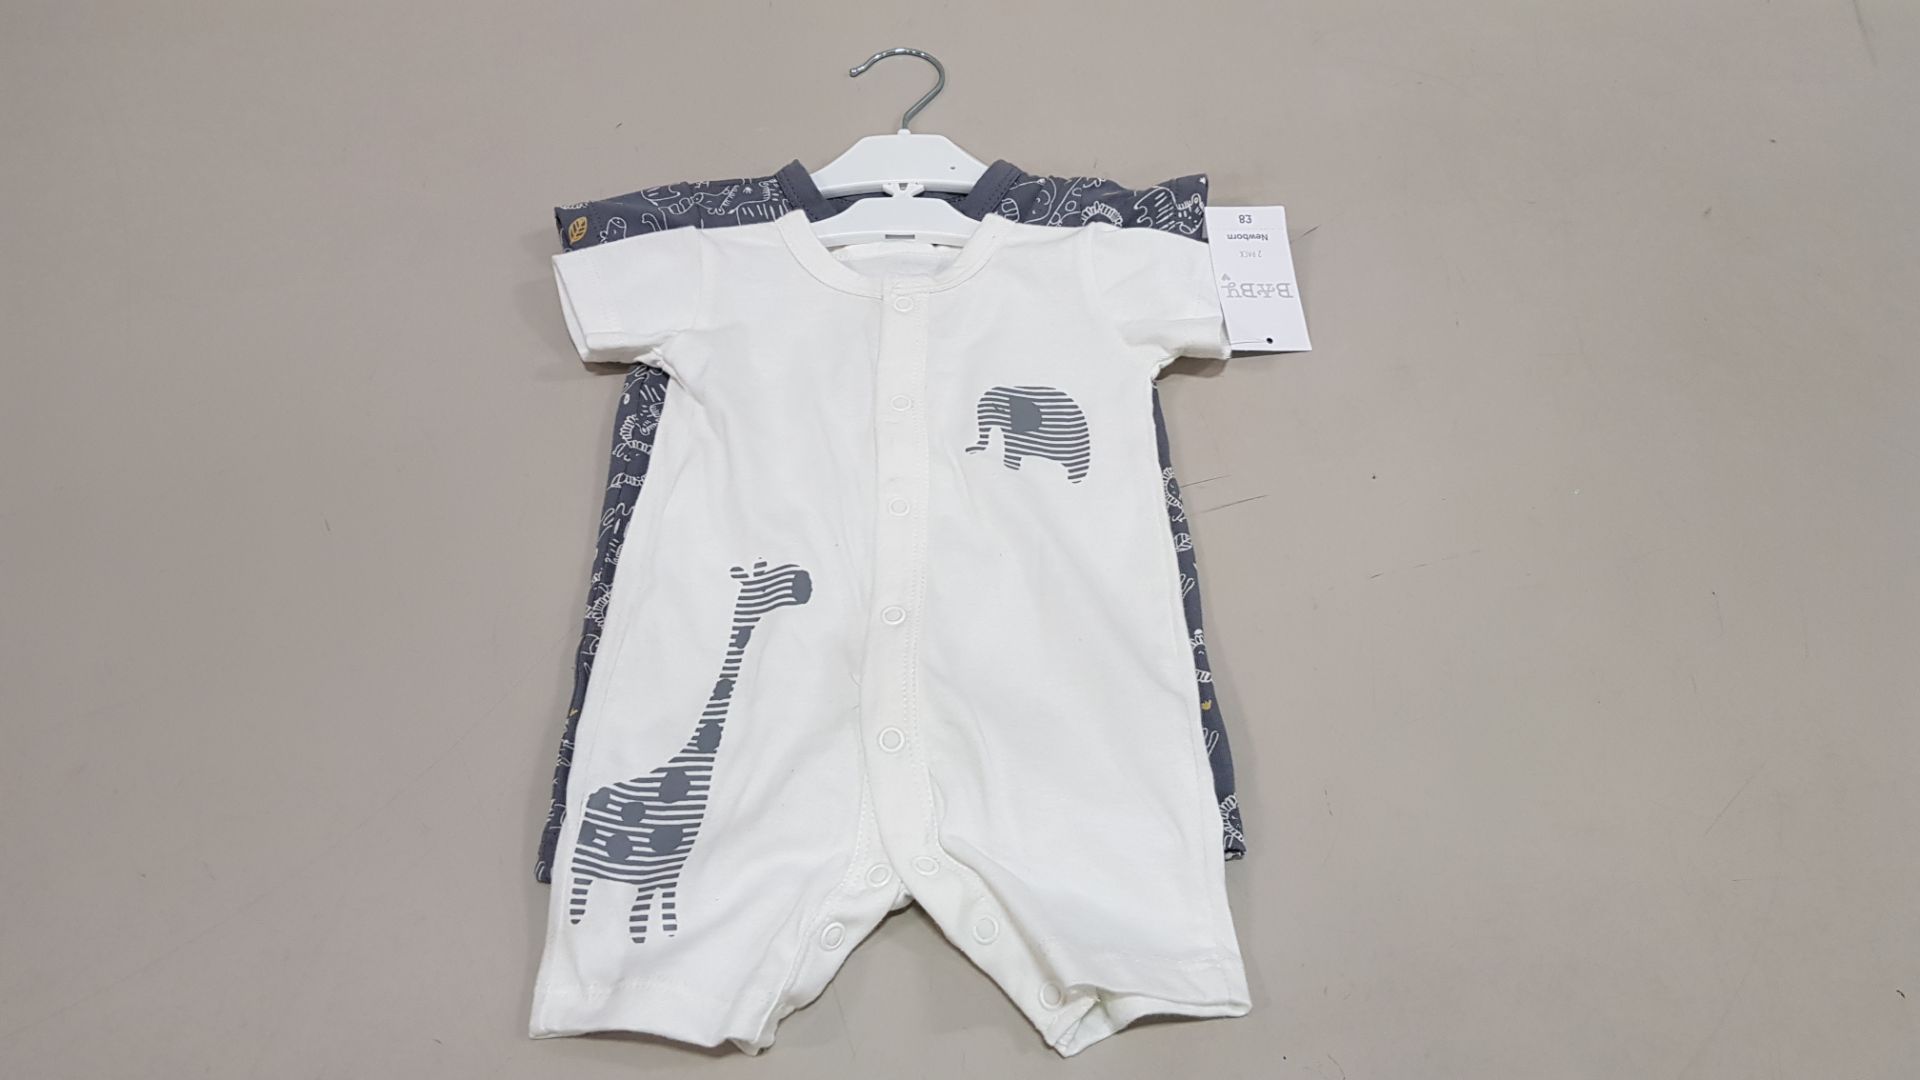 80X BRAND NEW TINY BABY TWO PIECE SETS RRP £5.00 (TOTAL RRP £400.00)